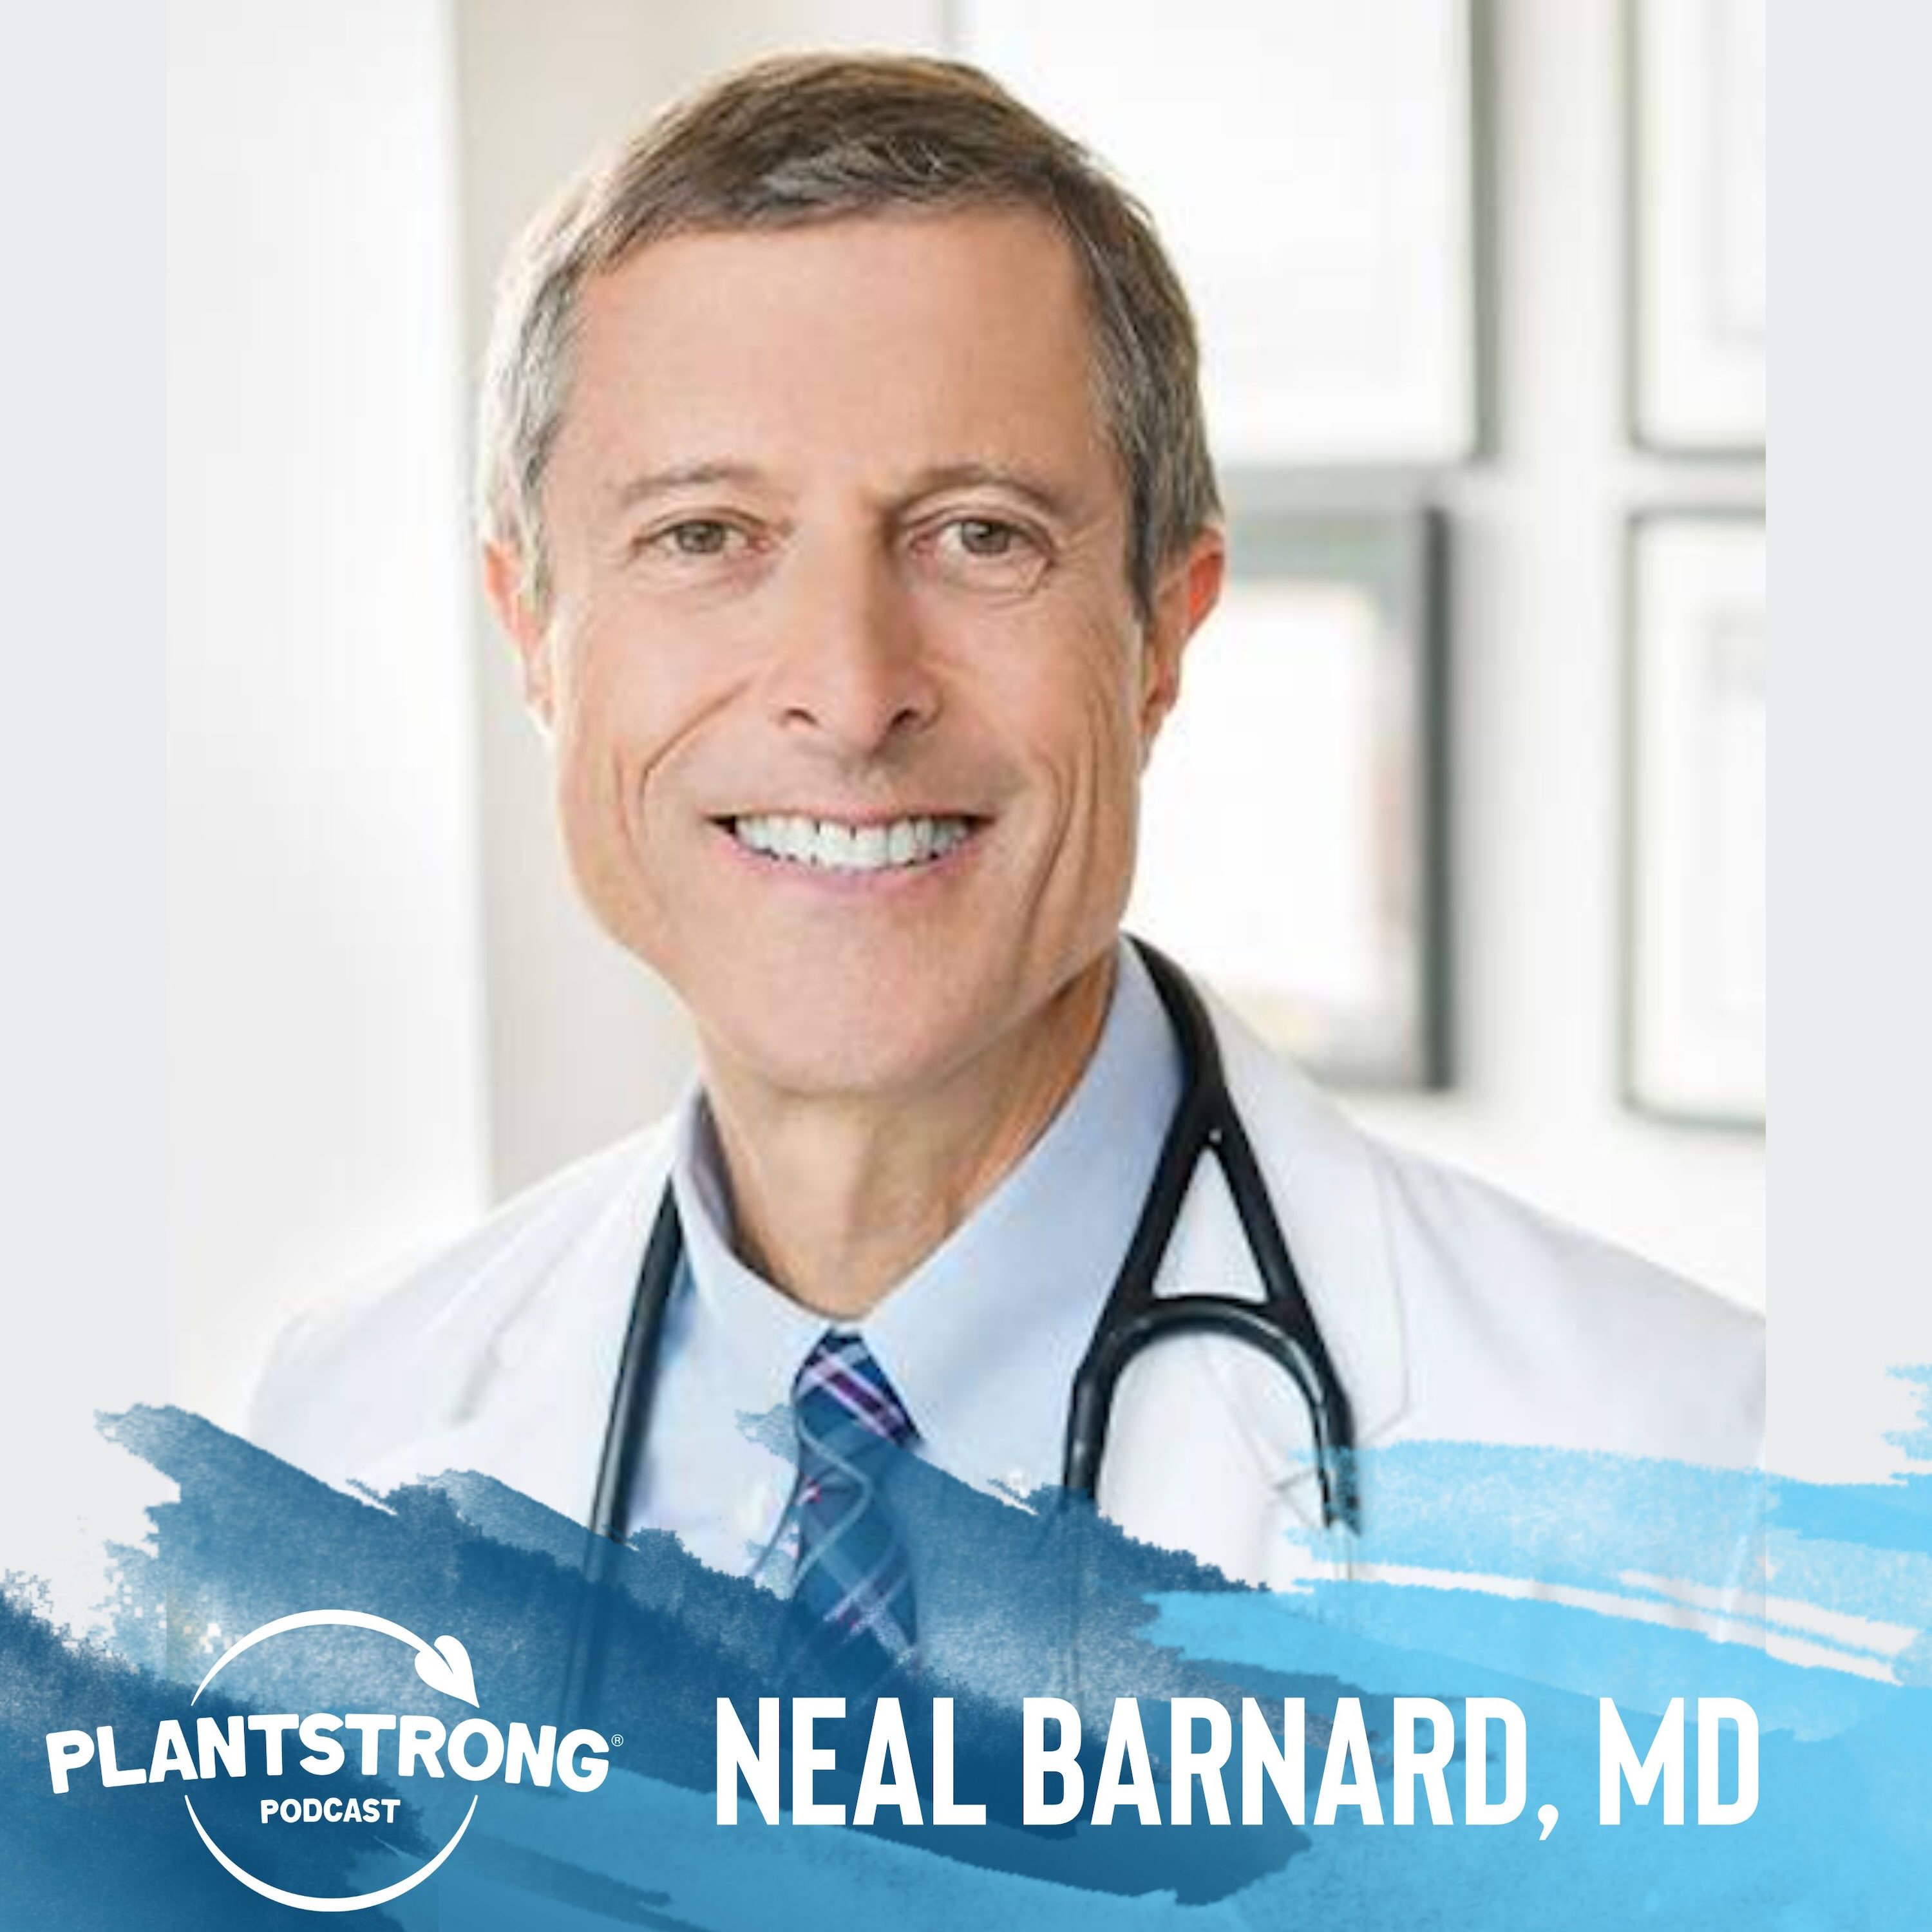 Ep. 241: Neal Barnard, MD - These Are Your Power Foods for Lasting Weight Loss